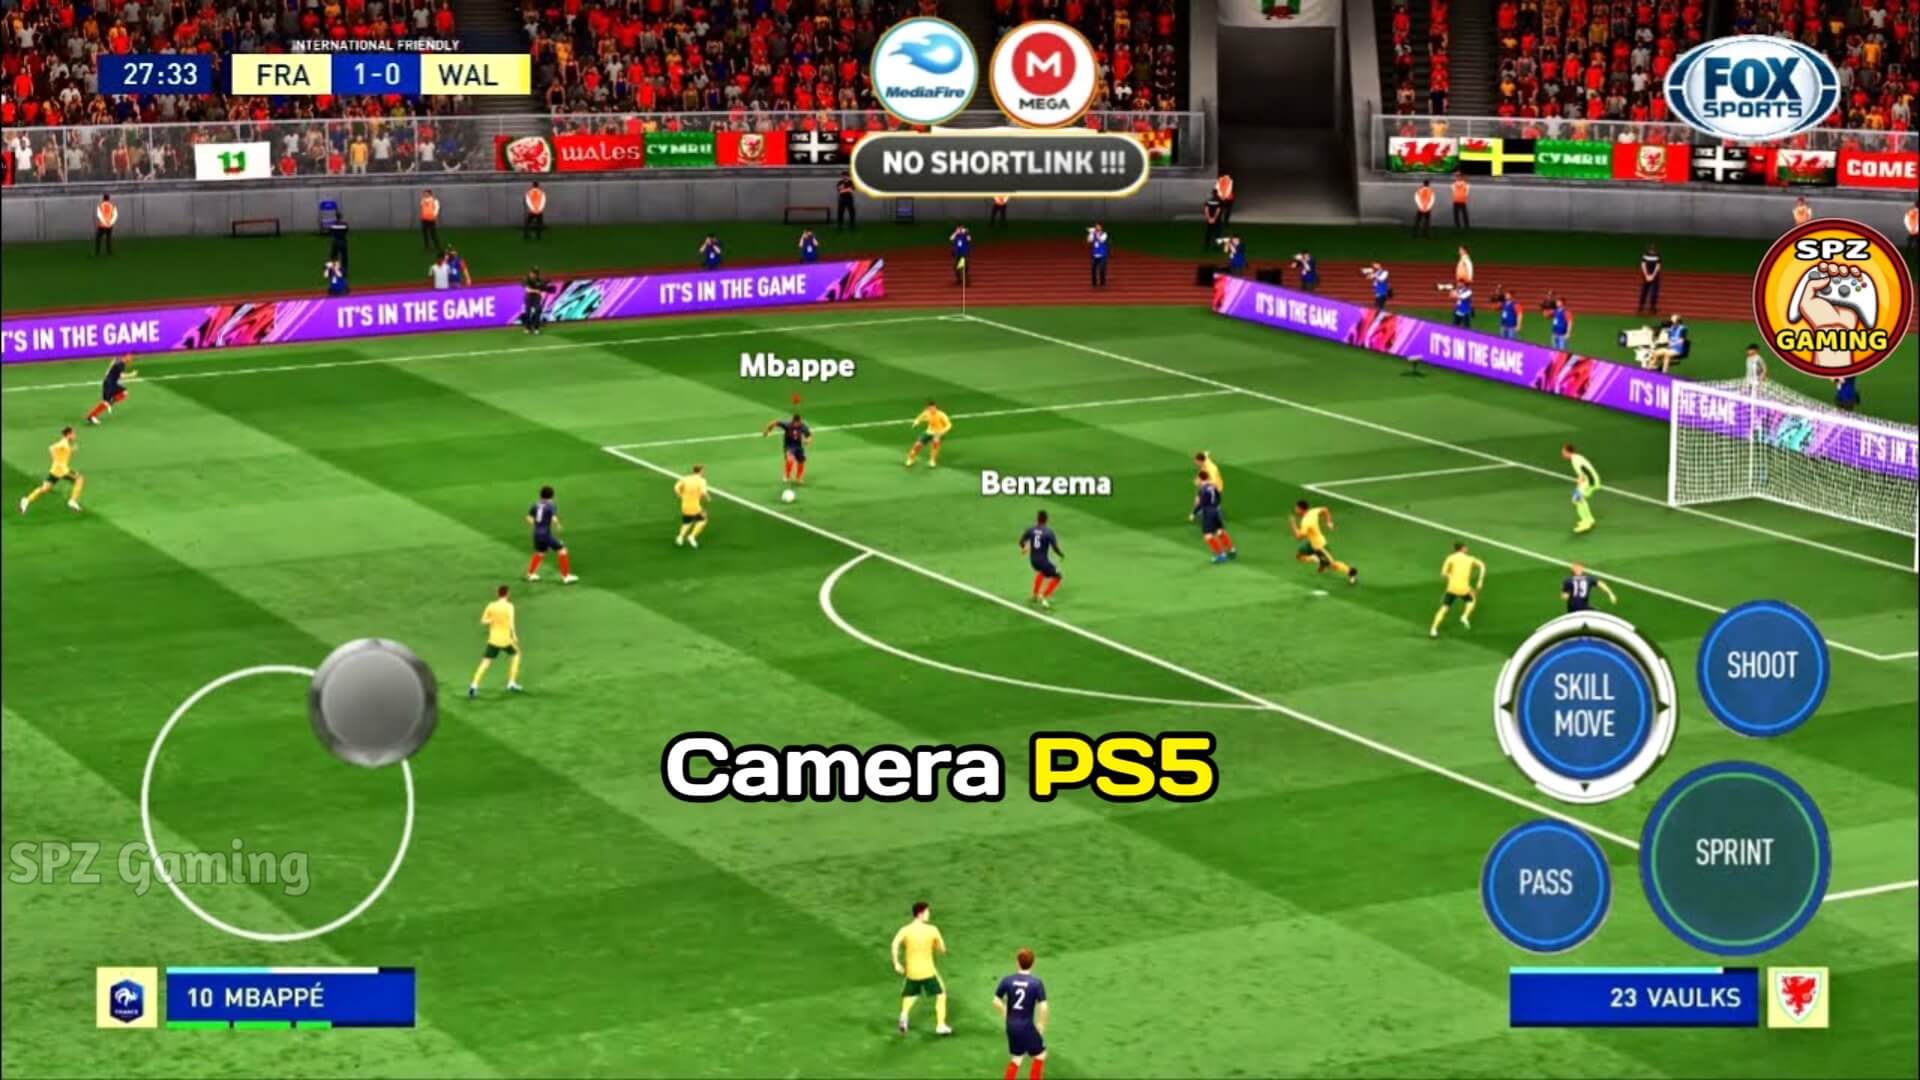 Download FIFA 22 PPSSPP Highly Compressed PS5 Camera For Android (Original PS5) 5